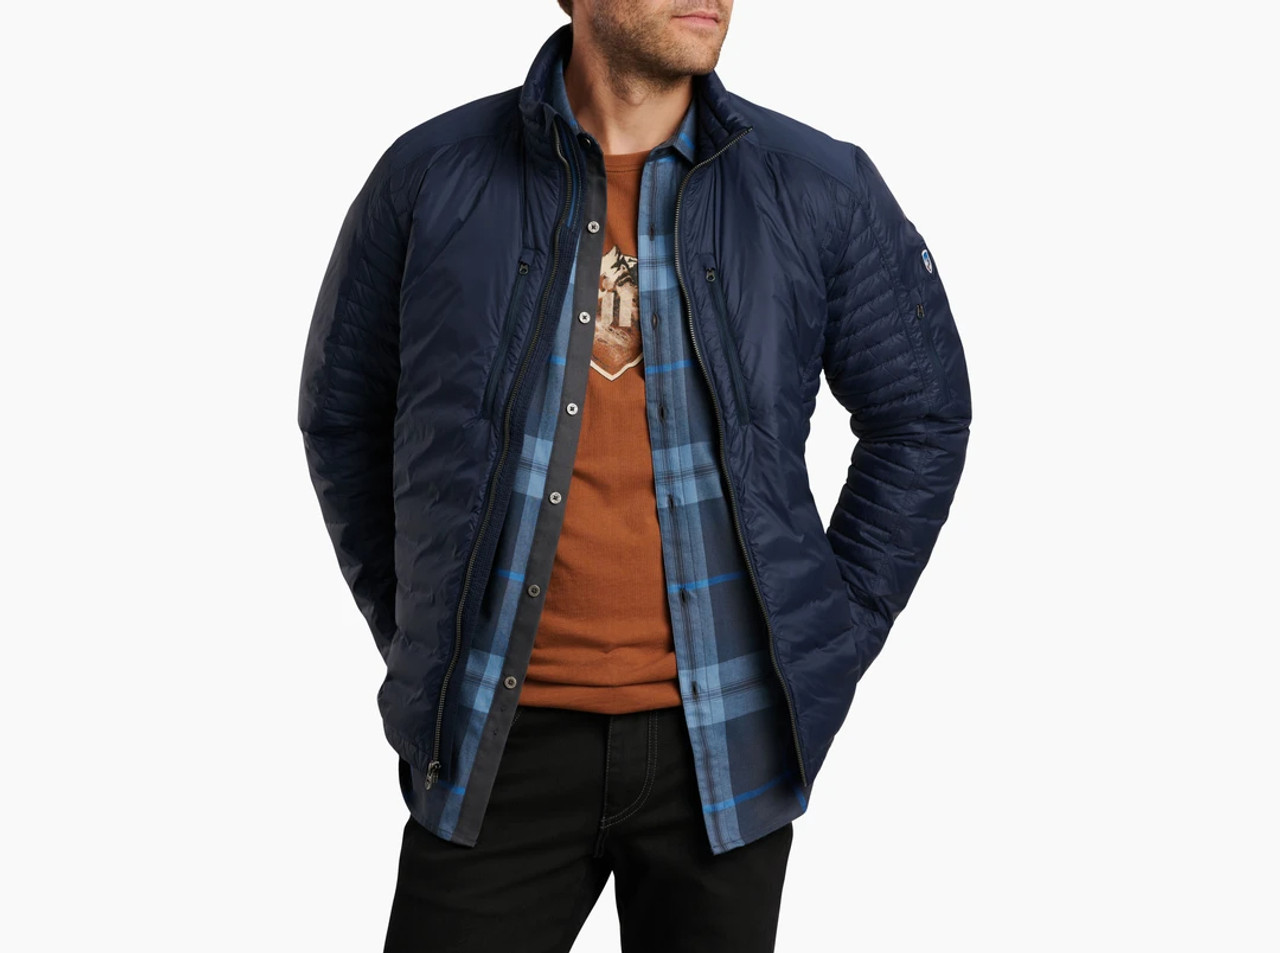 Spyfire Jacket - Midnight Blue - Chesapeake Bay Outfitters